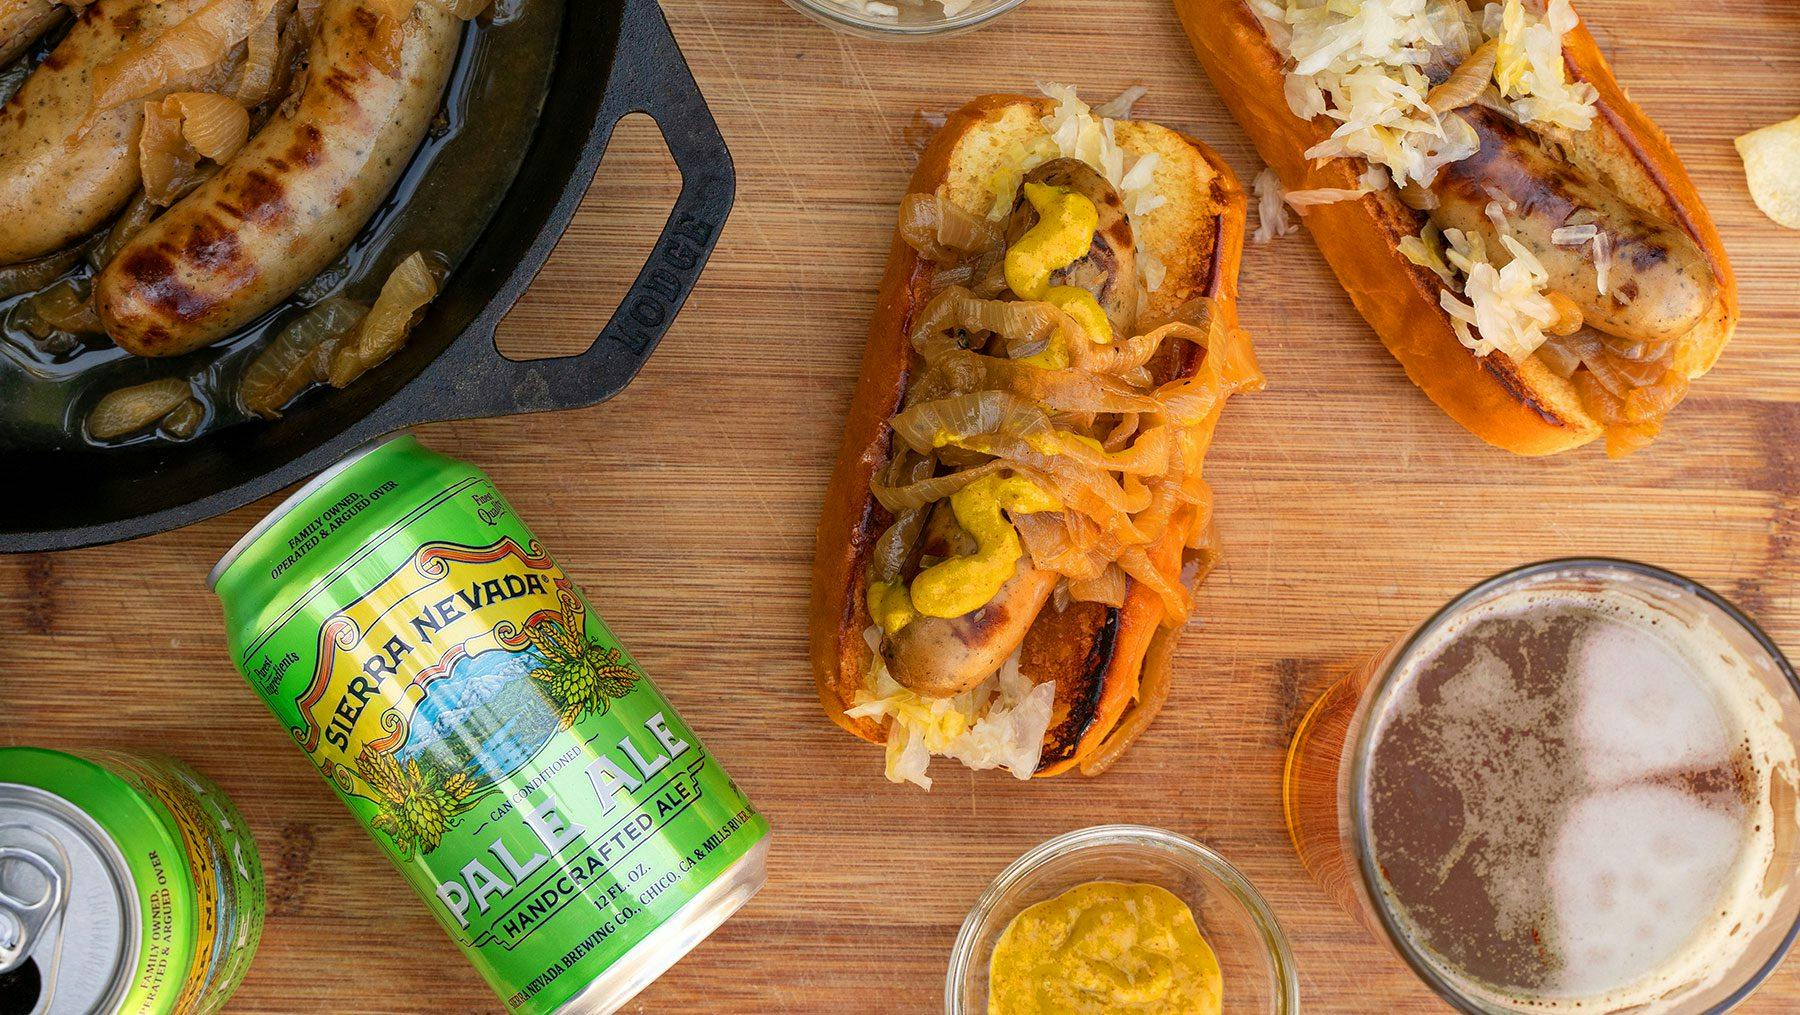 A can of Sierra Nevada Pale Ale next to cooked brats